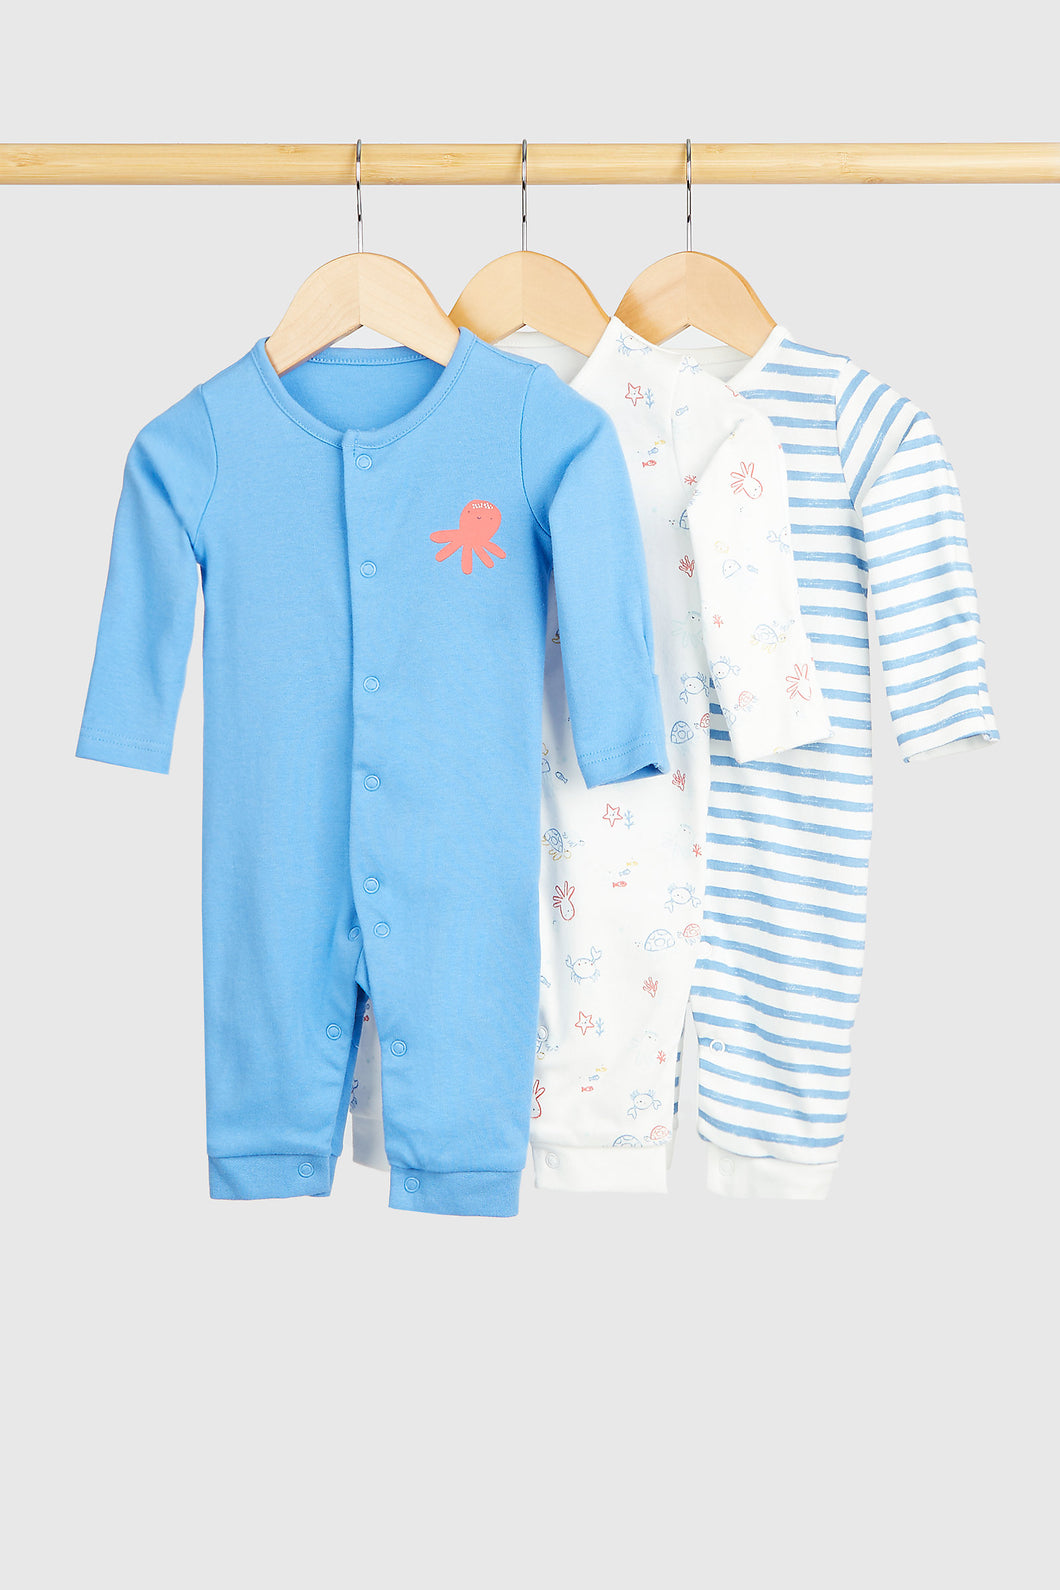 Mothercare Under The Sea Footless Sleepsuits - 3 Pack